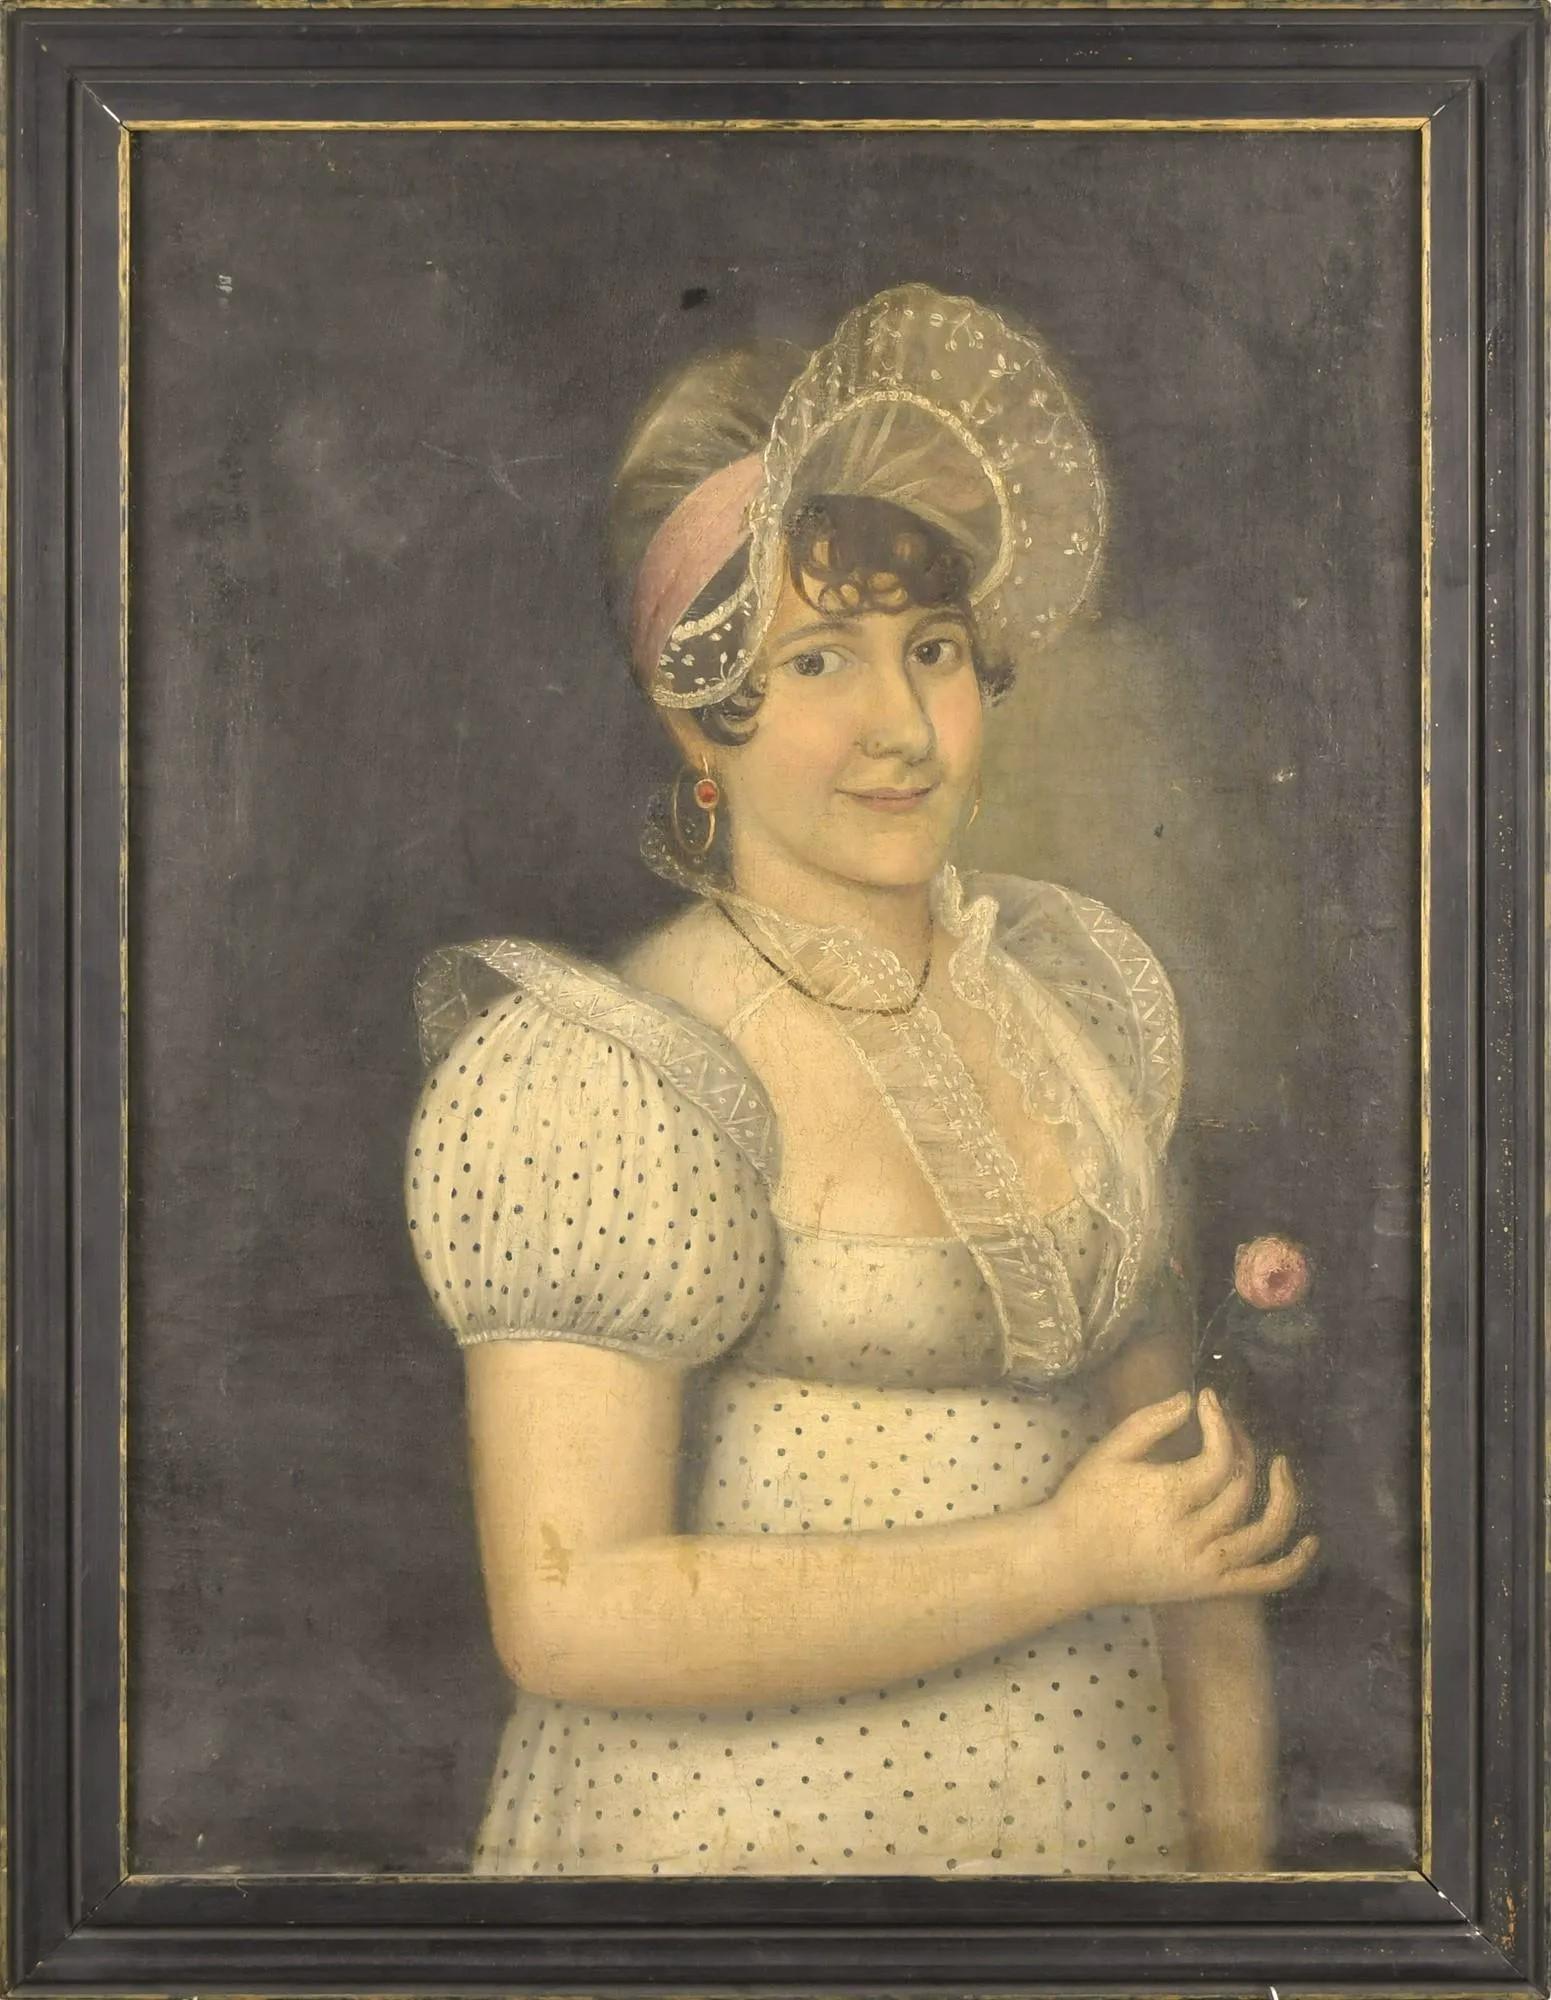 An early 19th century naive oil-on-canvas portrait of a young woman dressed in a laced trimmed dress and holding a flower, Empire period. The reverse showing a French gallery label. Older black wood frame.